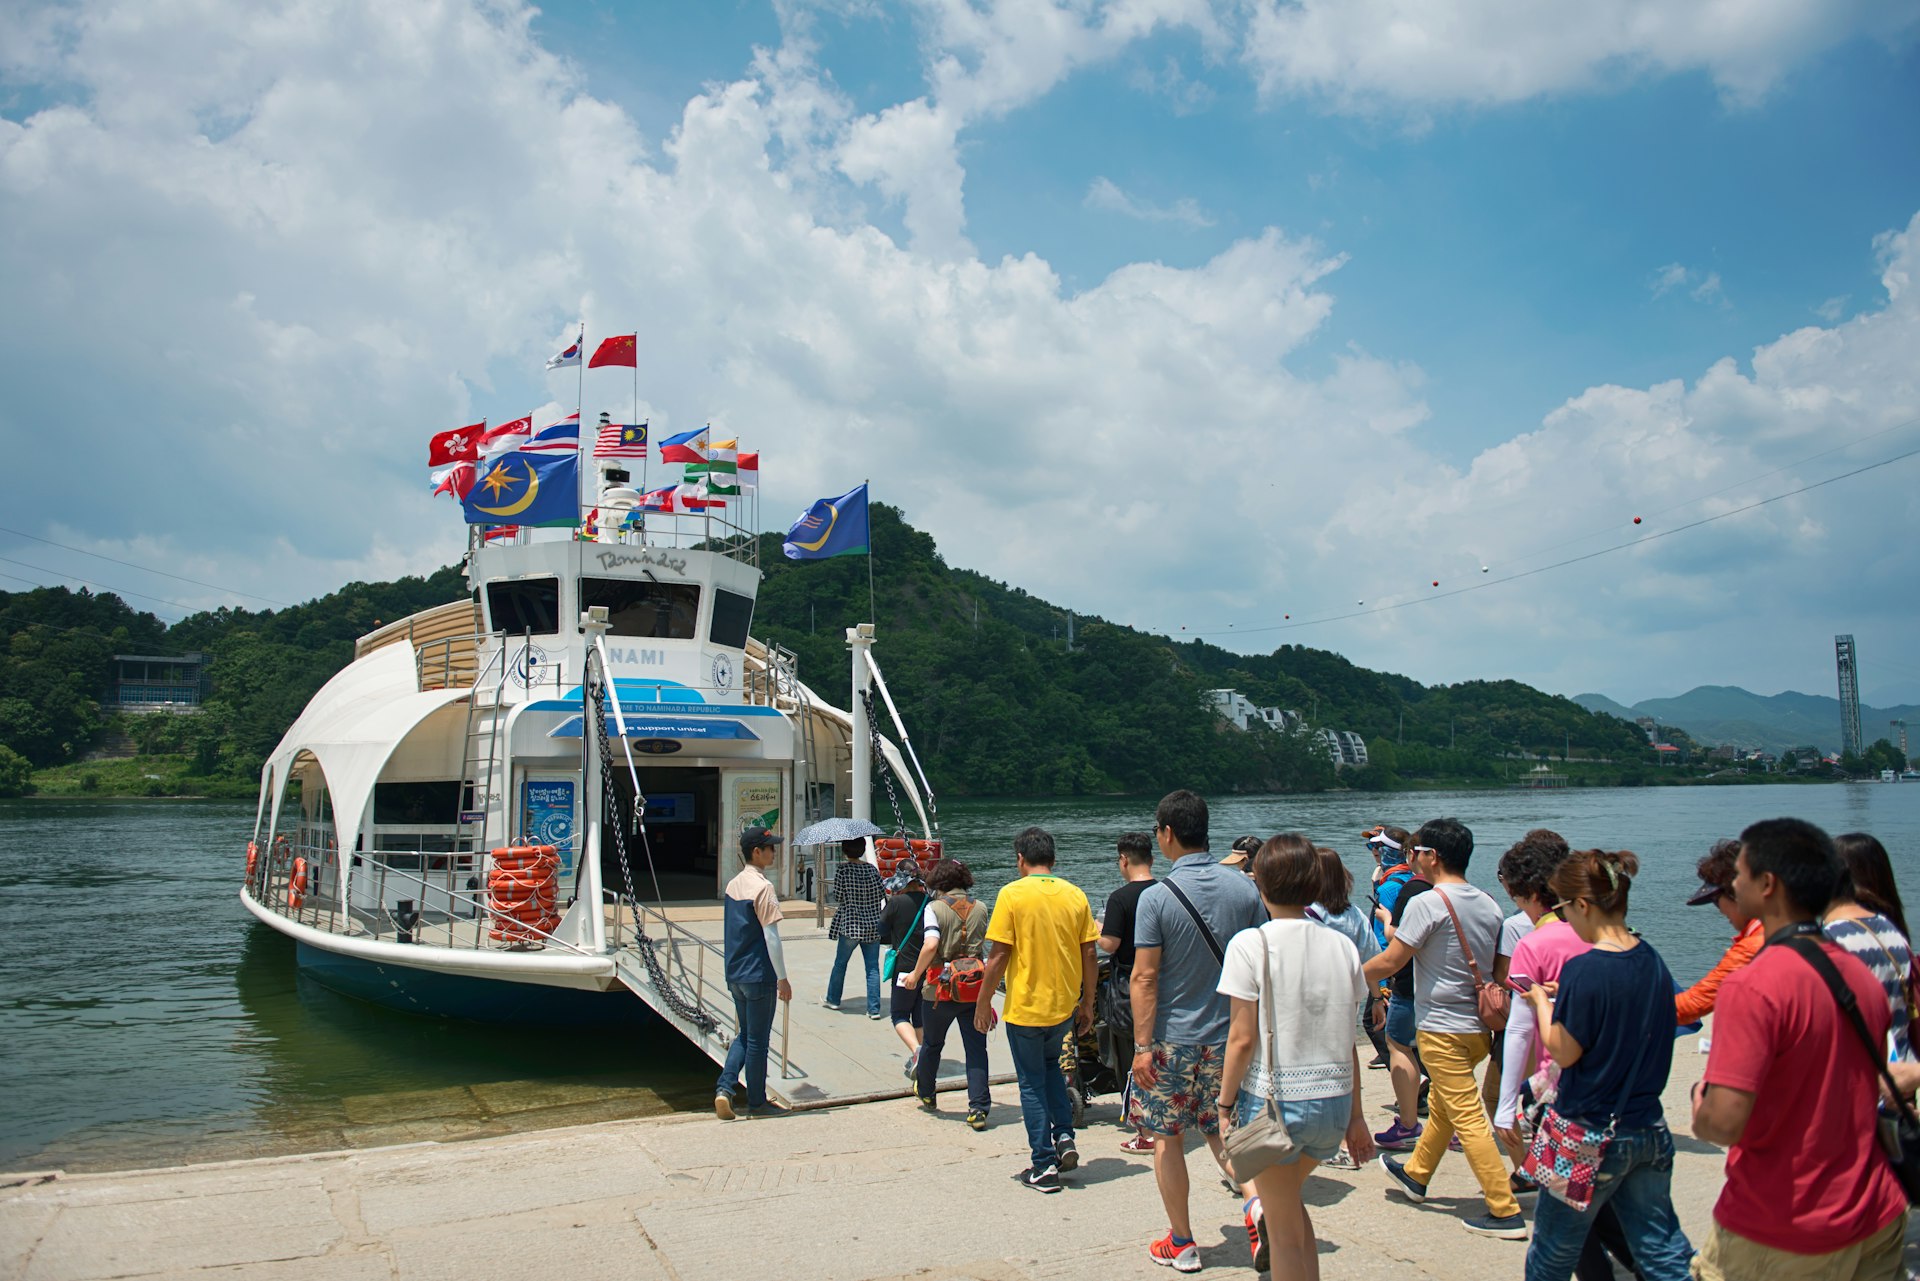 tourists Leaving the pier of Namiseom island and climbing aboard a ferry